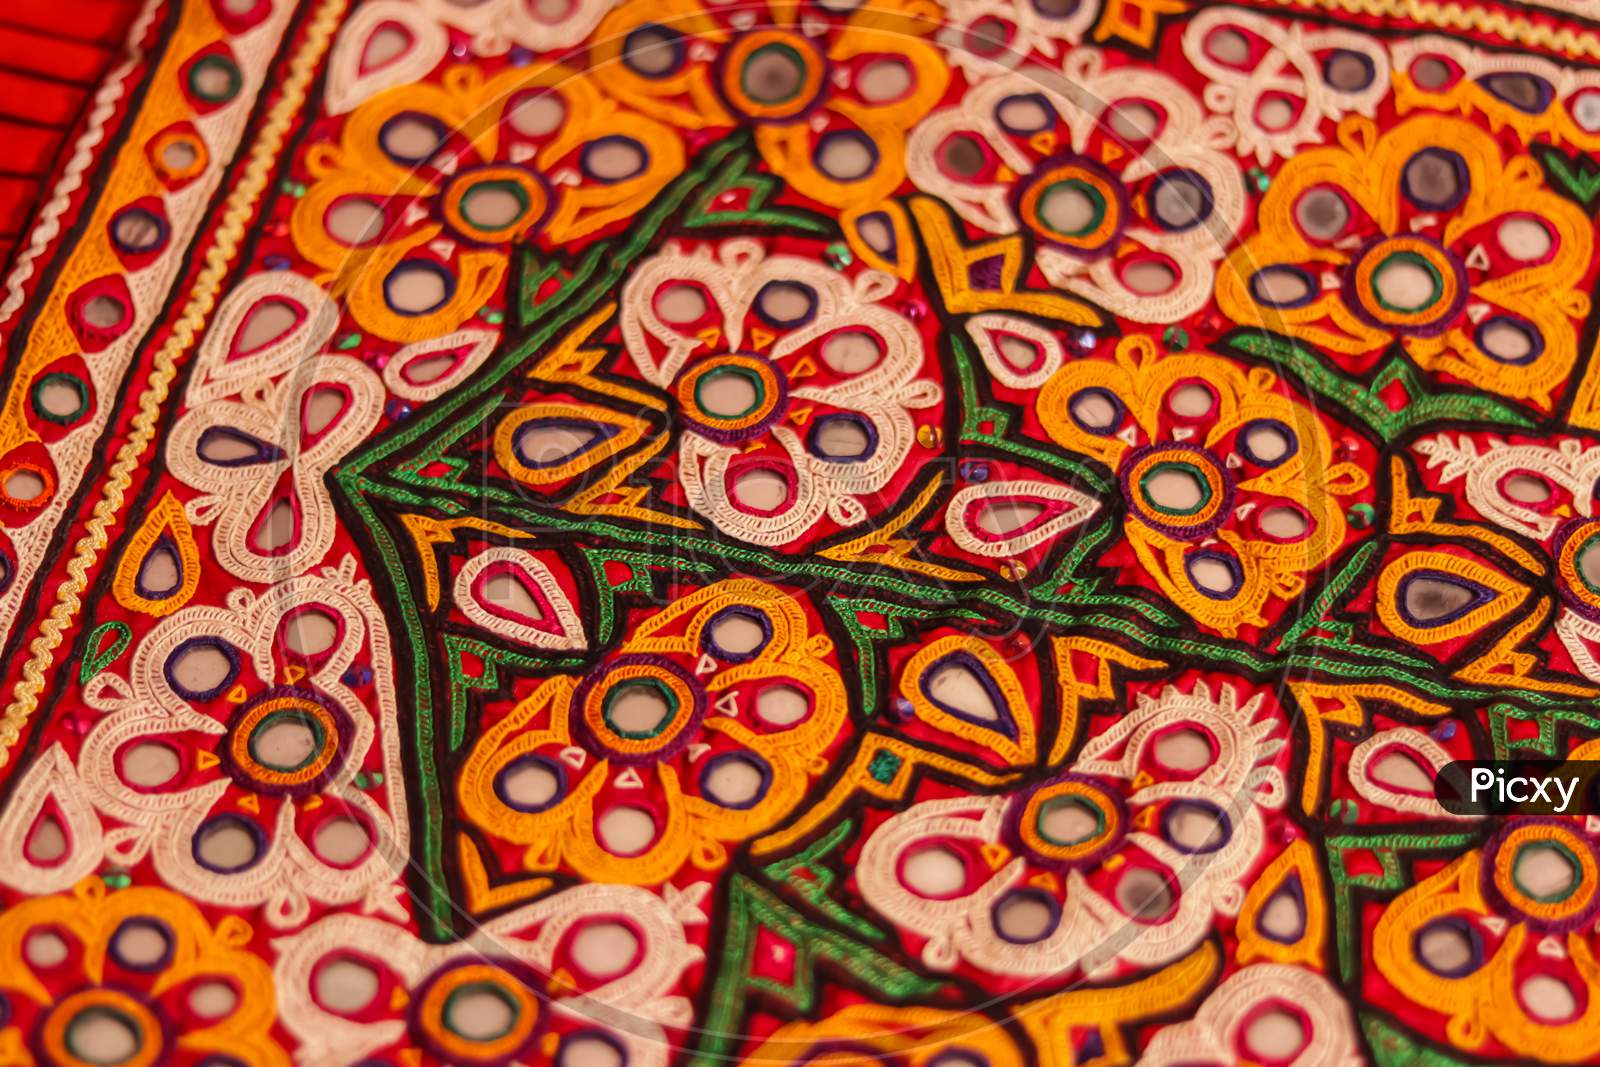 Mirrored Embroidery Work Typical Of The Aahir Tribe,Unidentified Man Embroidering Cloth In Traditional Method Of India,Mirror Work Colorful Handmade Ahir Bharat,Kutch-Gujarat